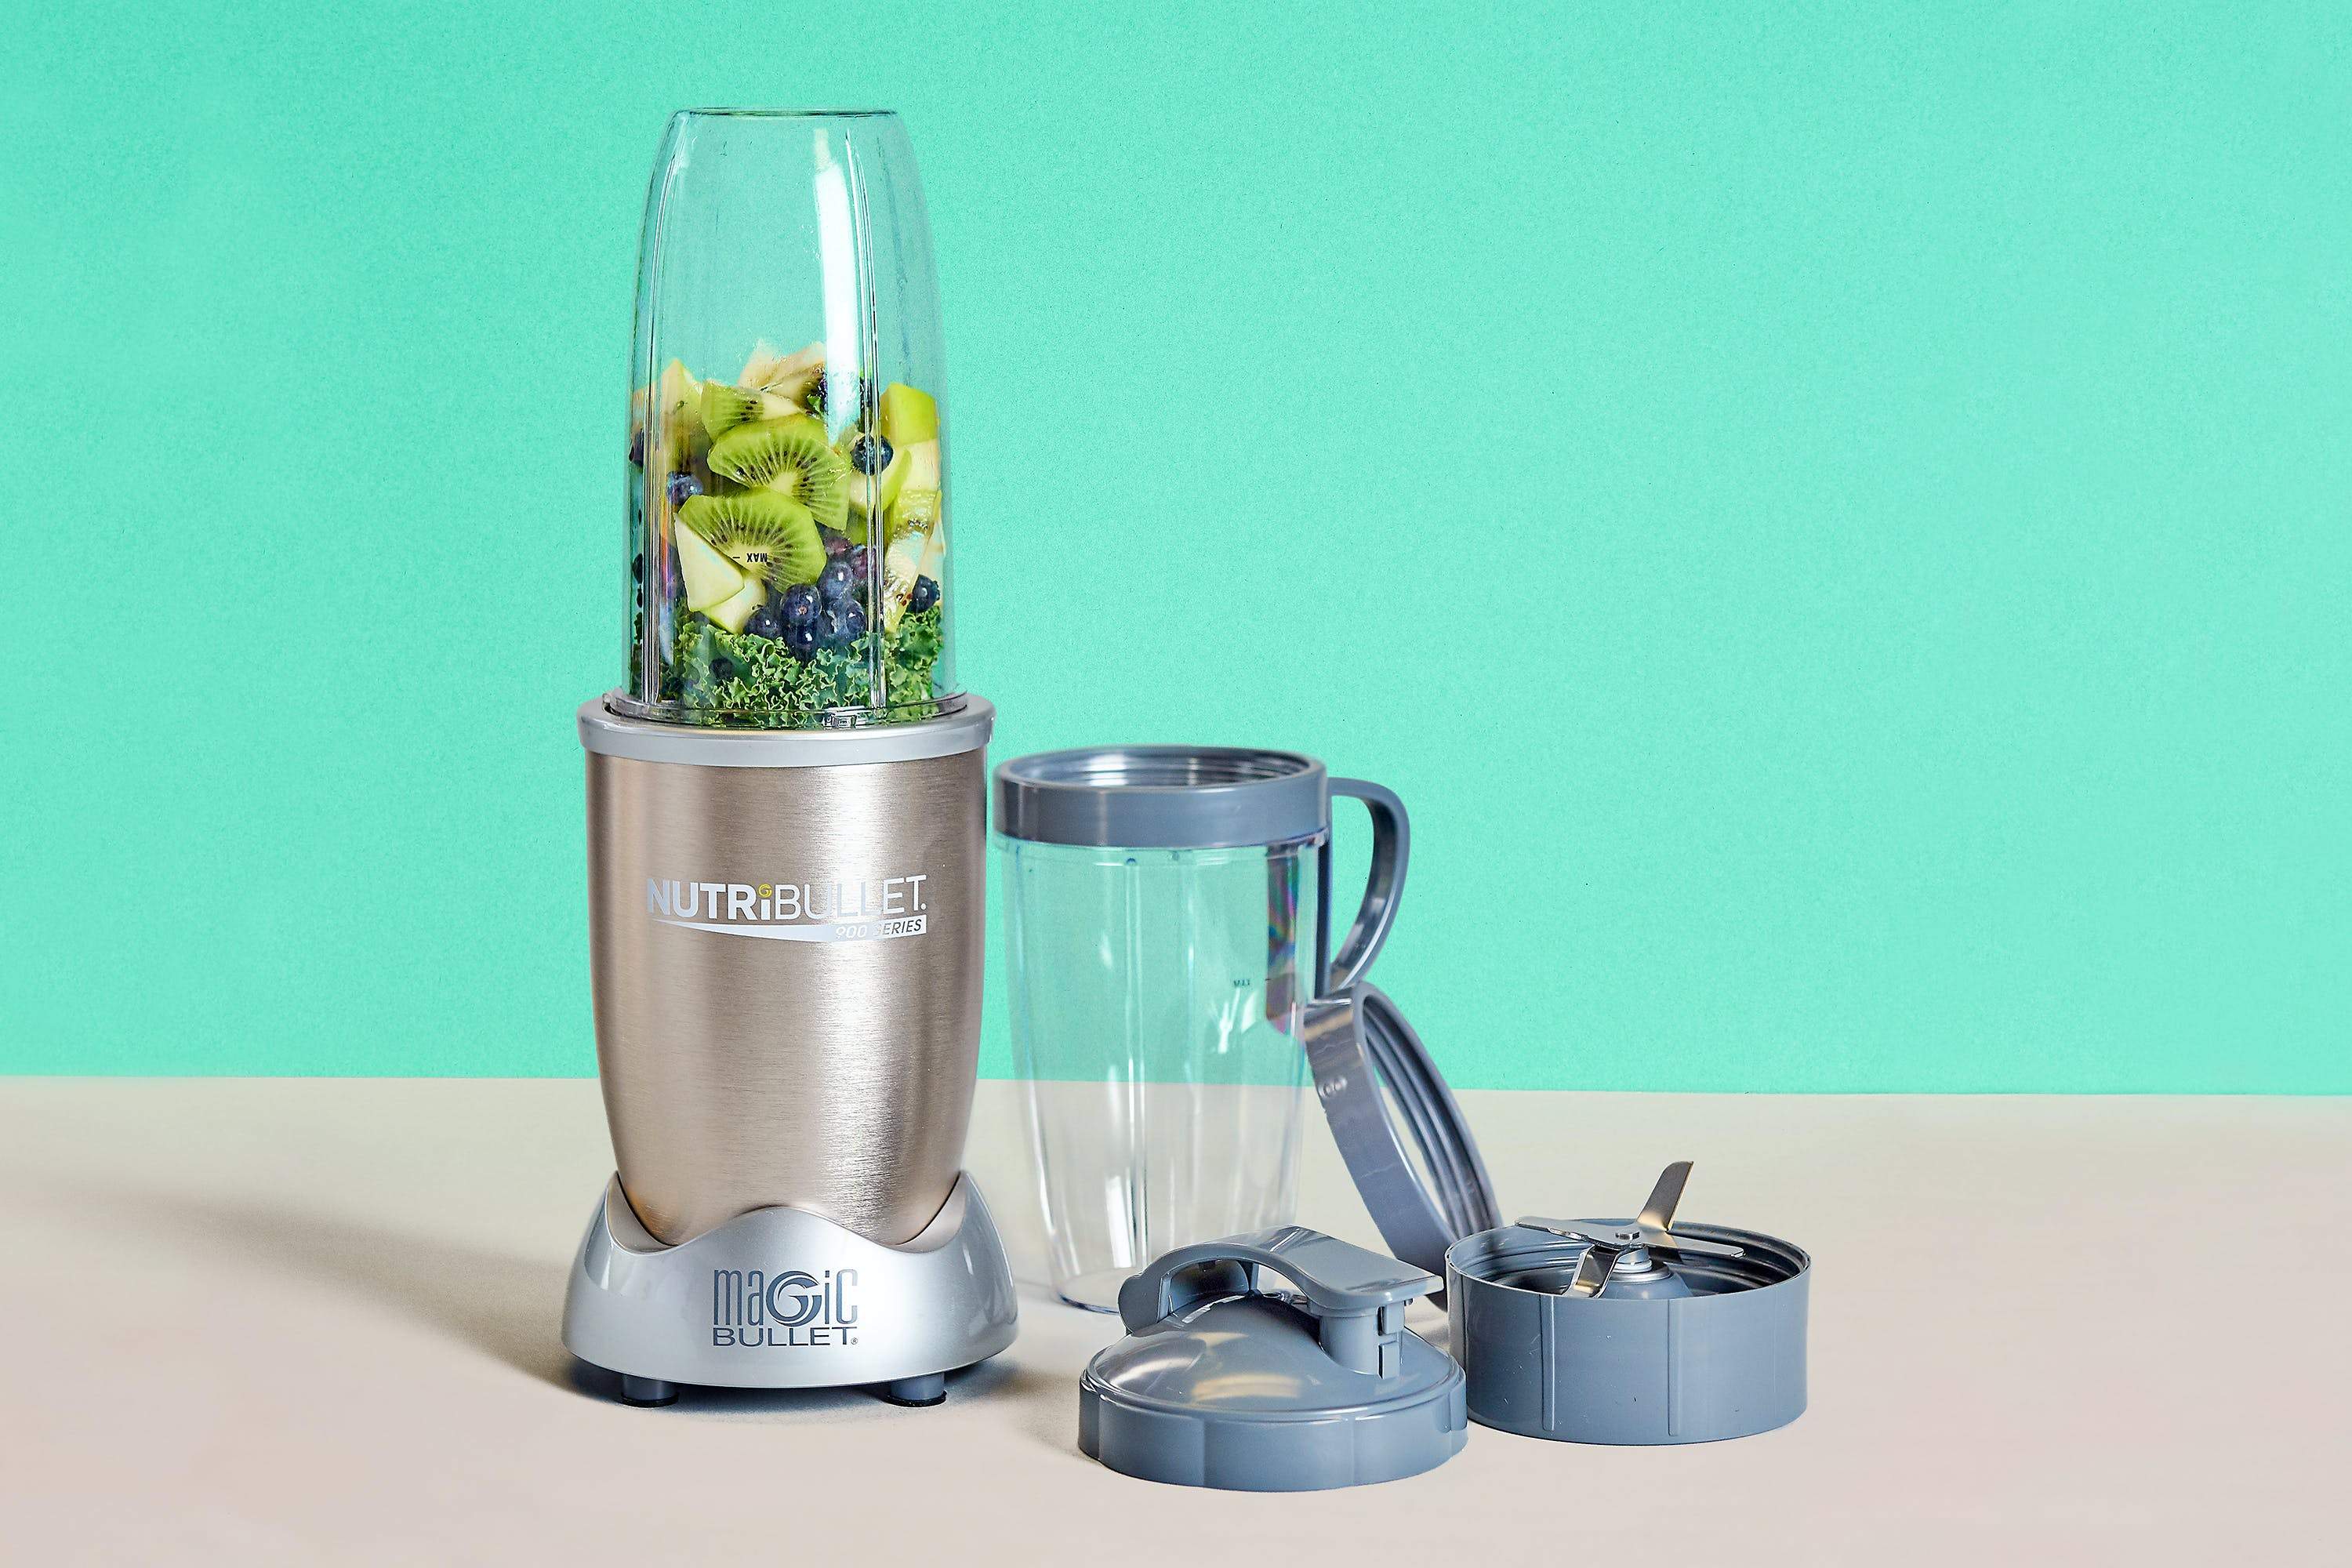 Getting Started: How To Use NutriBullet